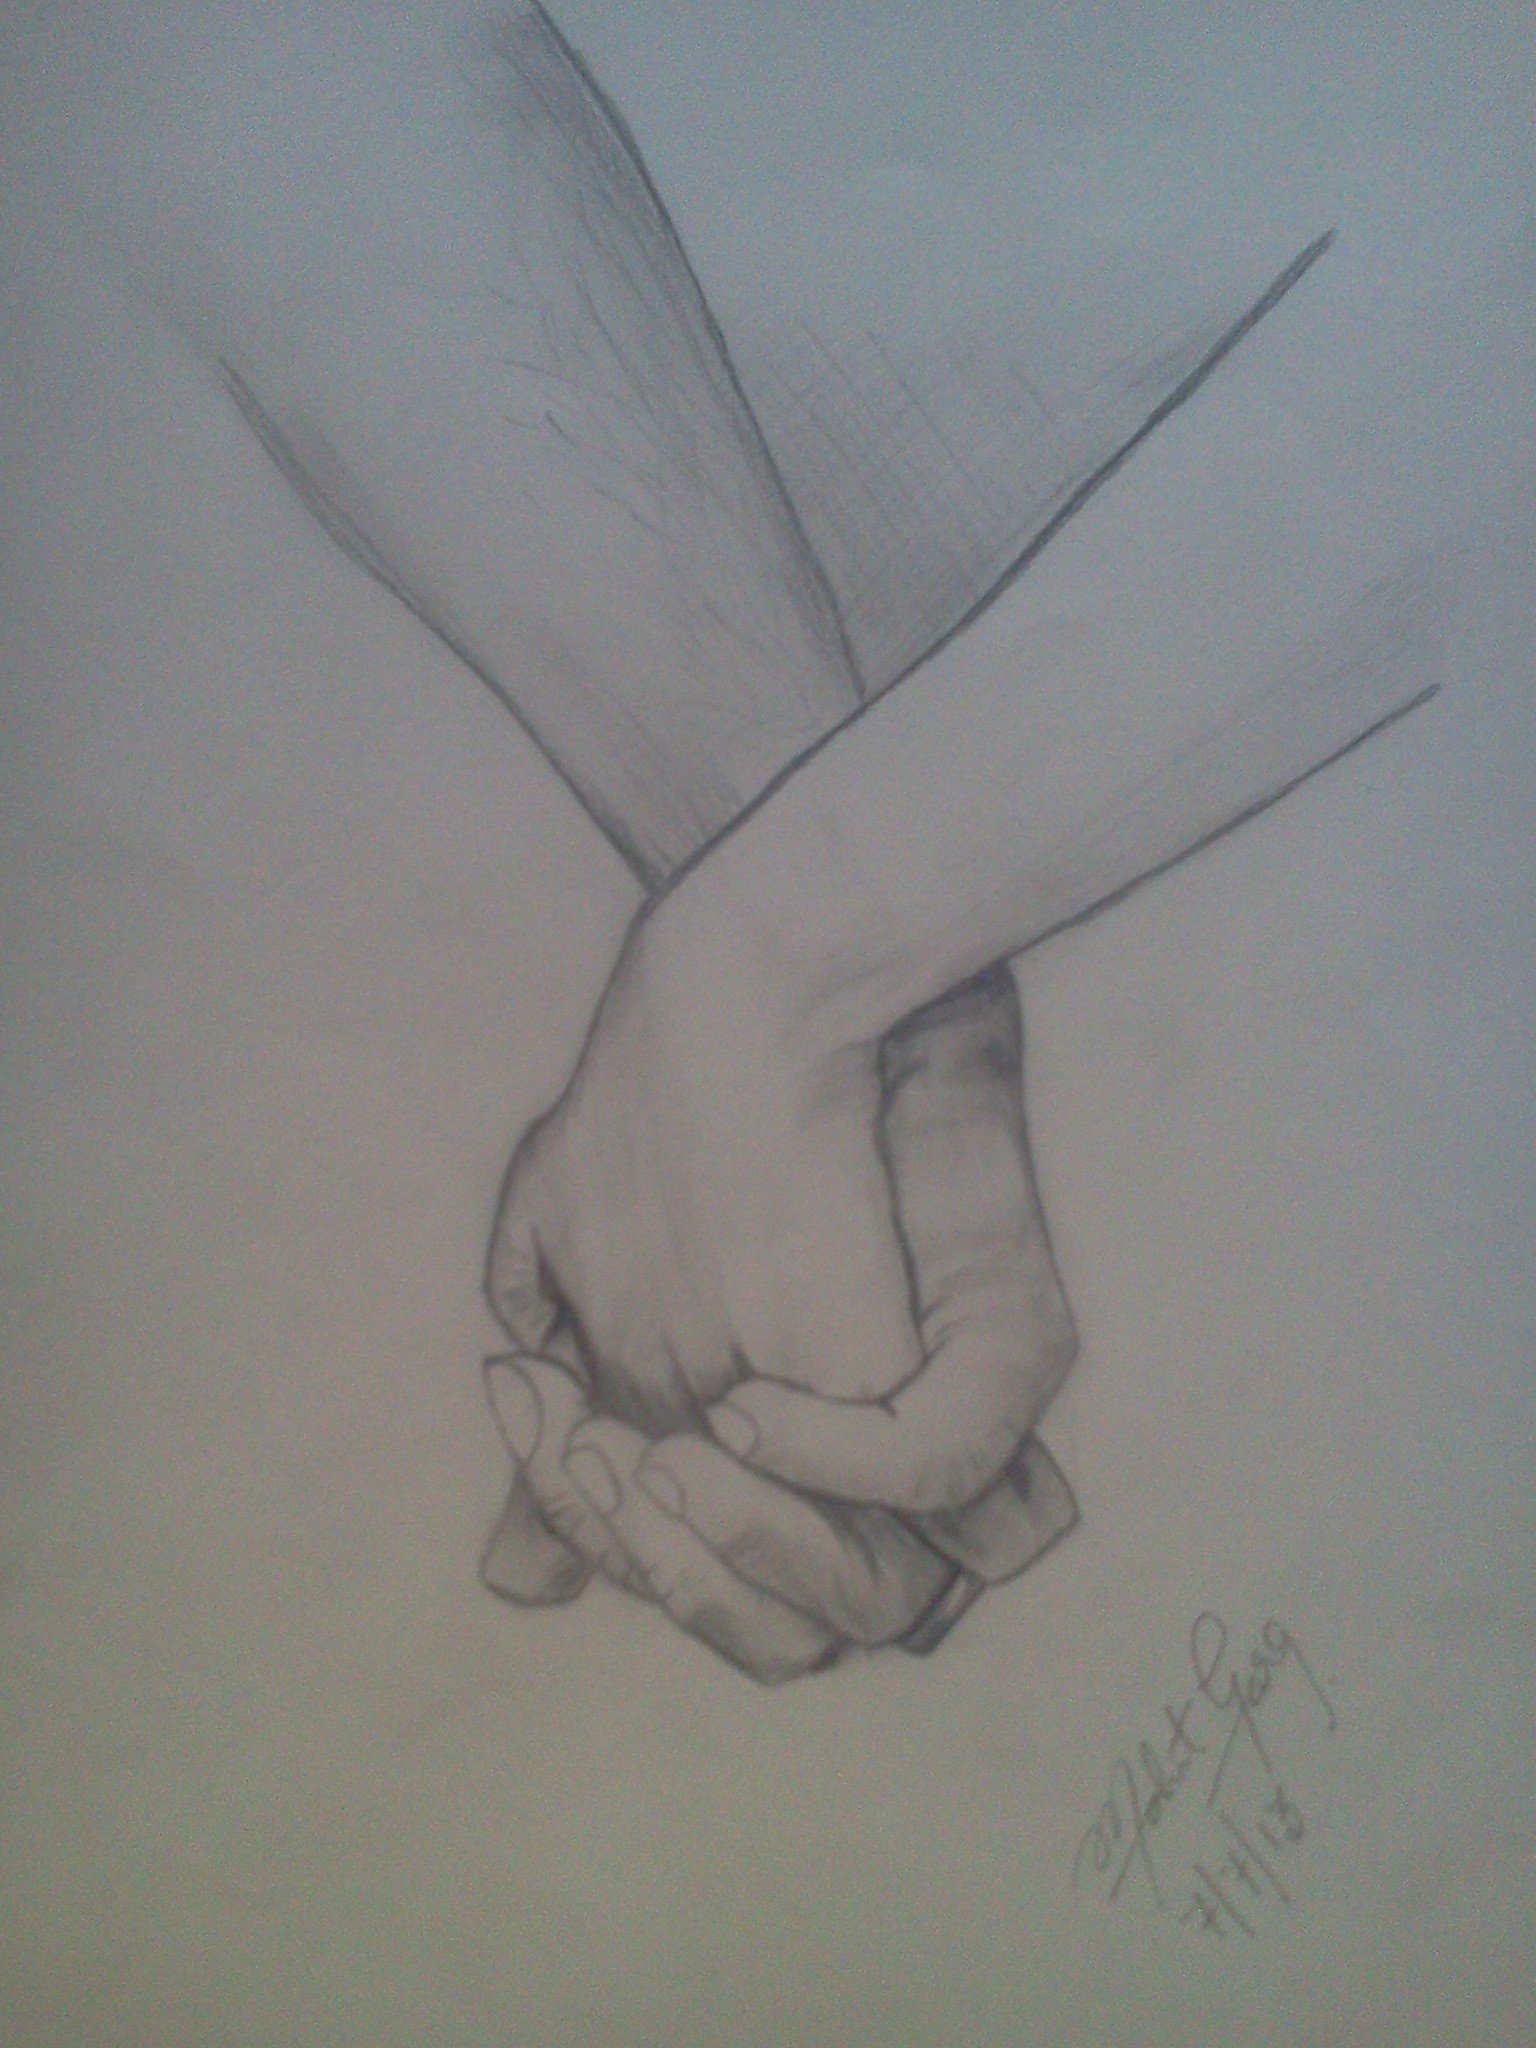 Pencil Drawing For Love Pens Drawing - Drawing Image